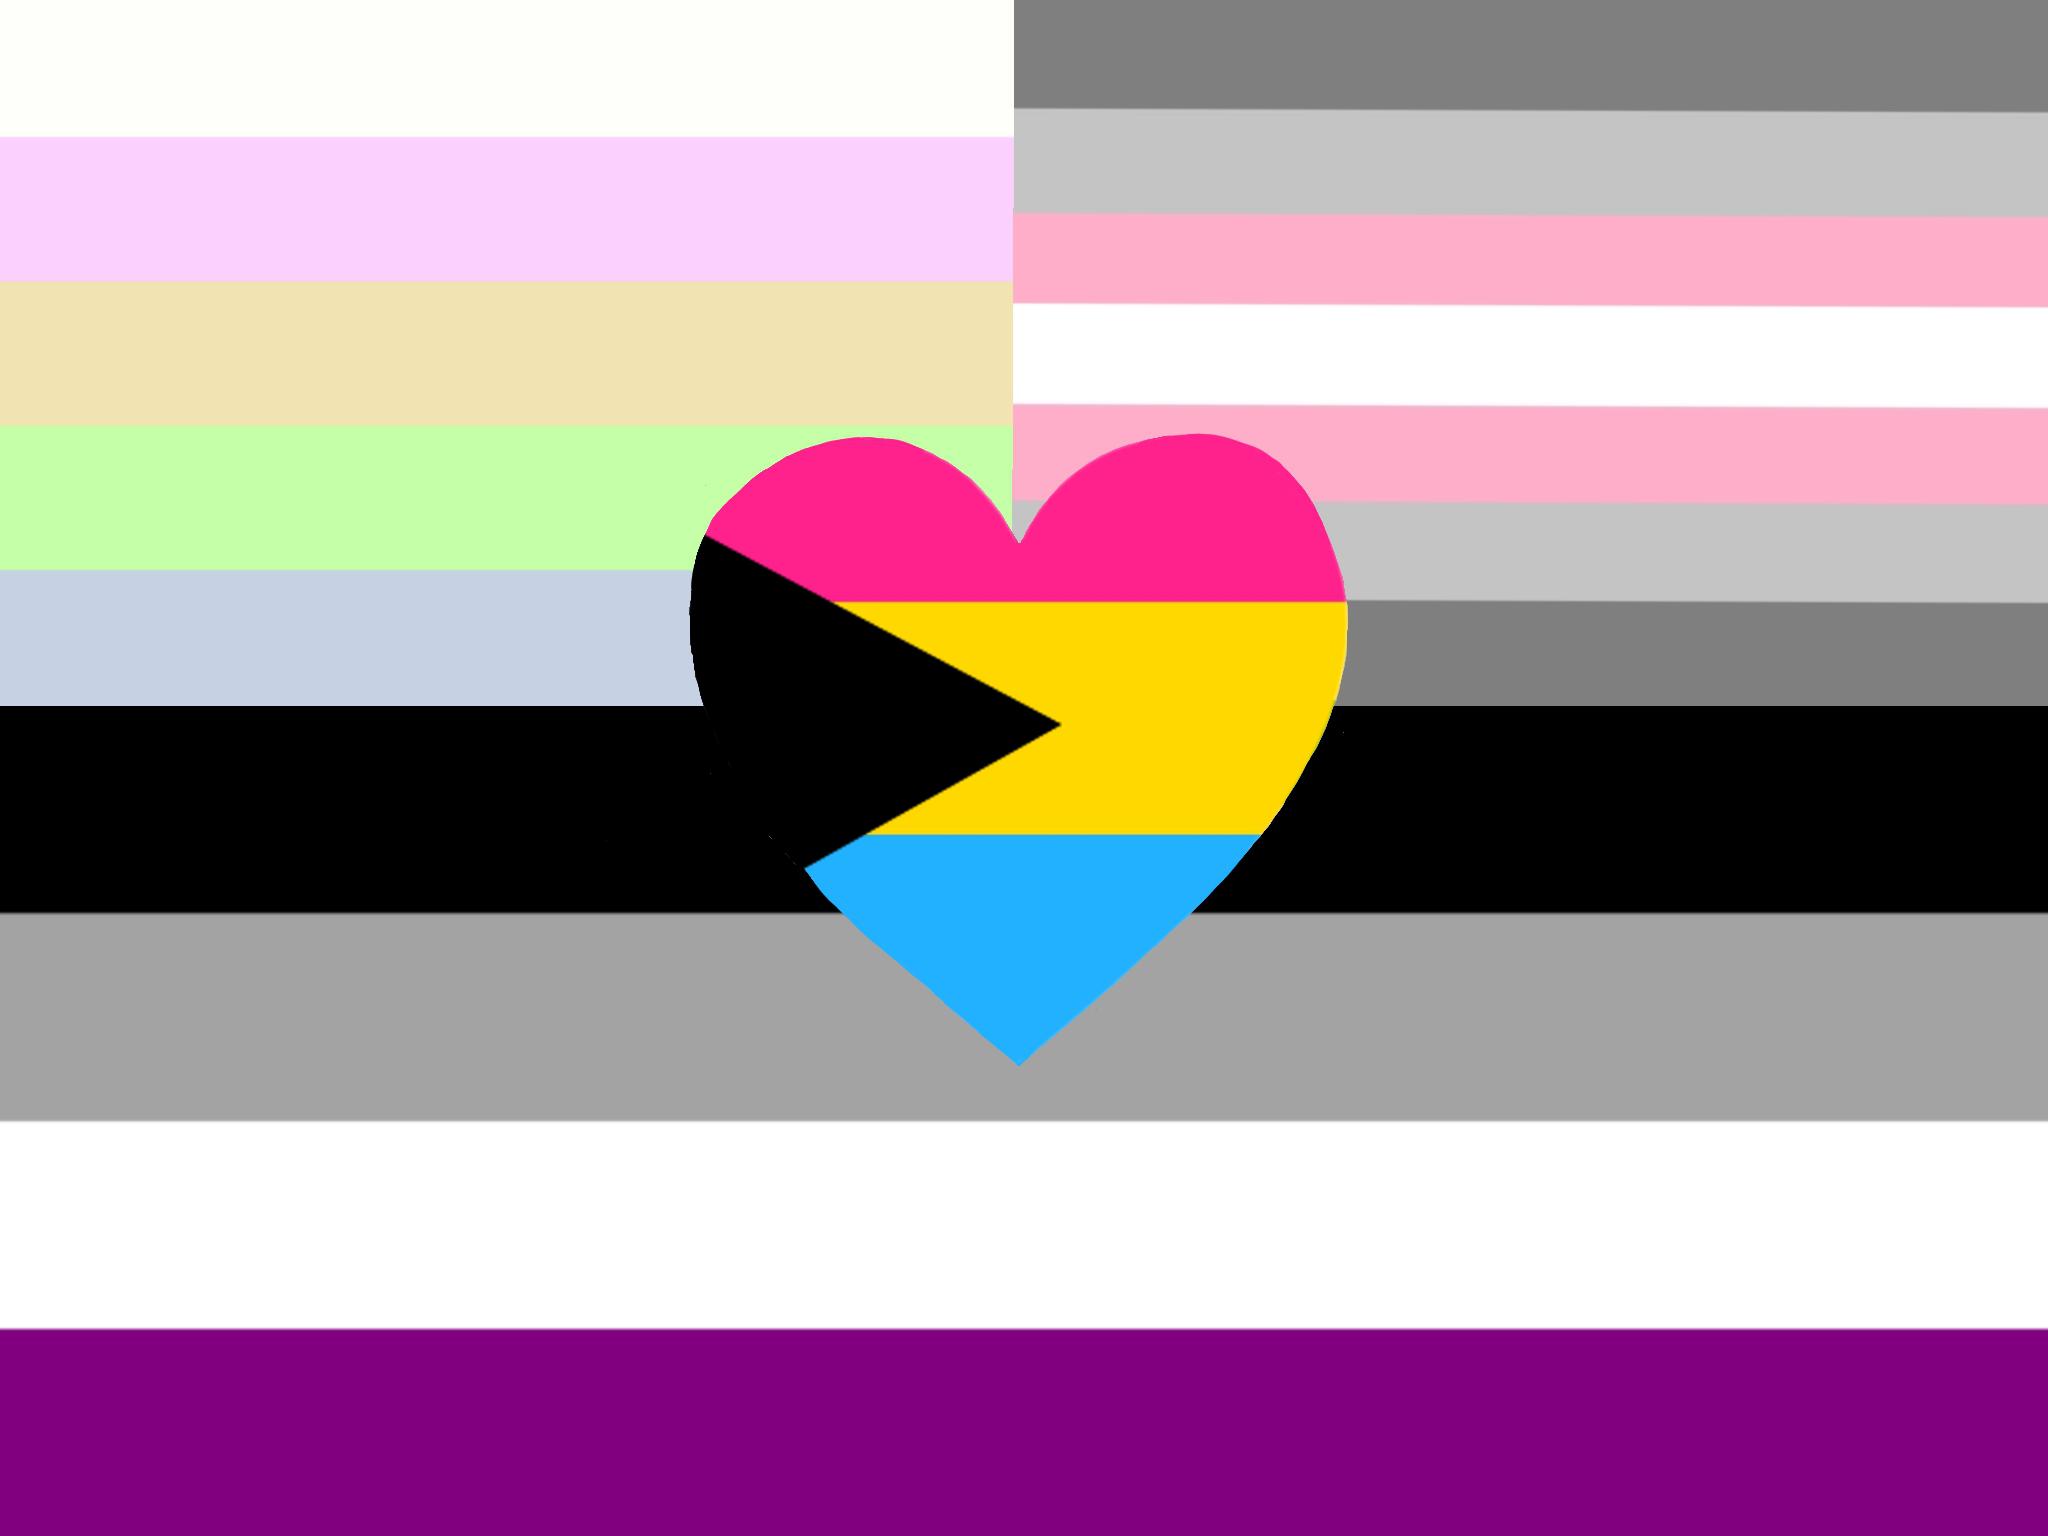 Cassgenderfae Demigirl Asexual Demi Panromantic Flag I Made For Myself. Don't Know If Its Weird To Put Gender And Sexuality On The Same Flag, But I Did It Anyway